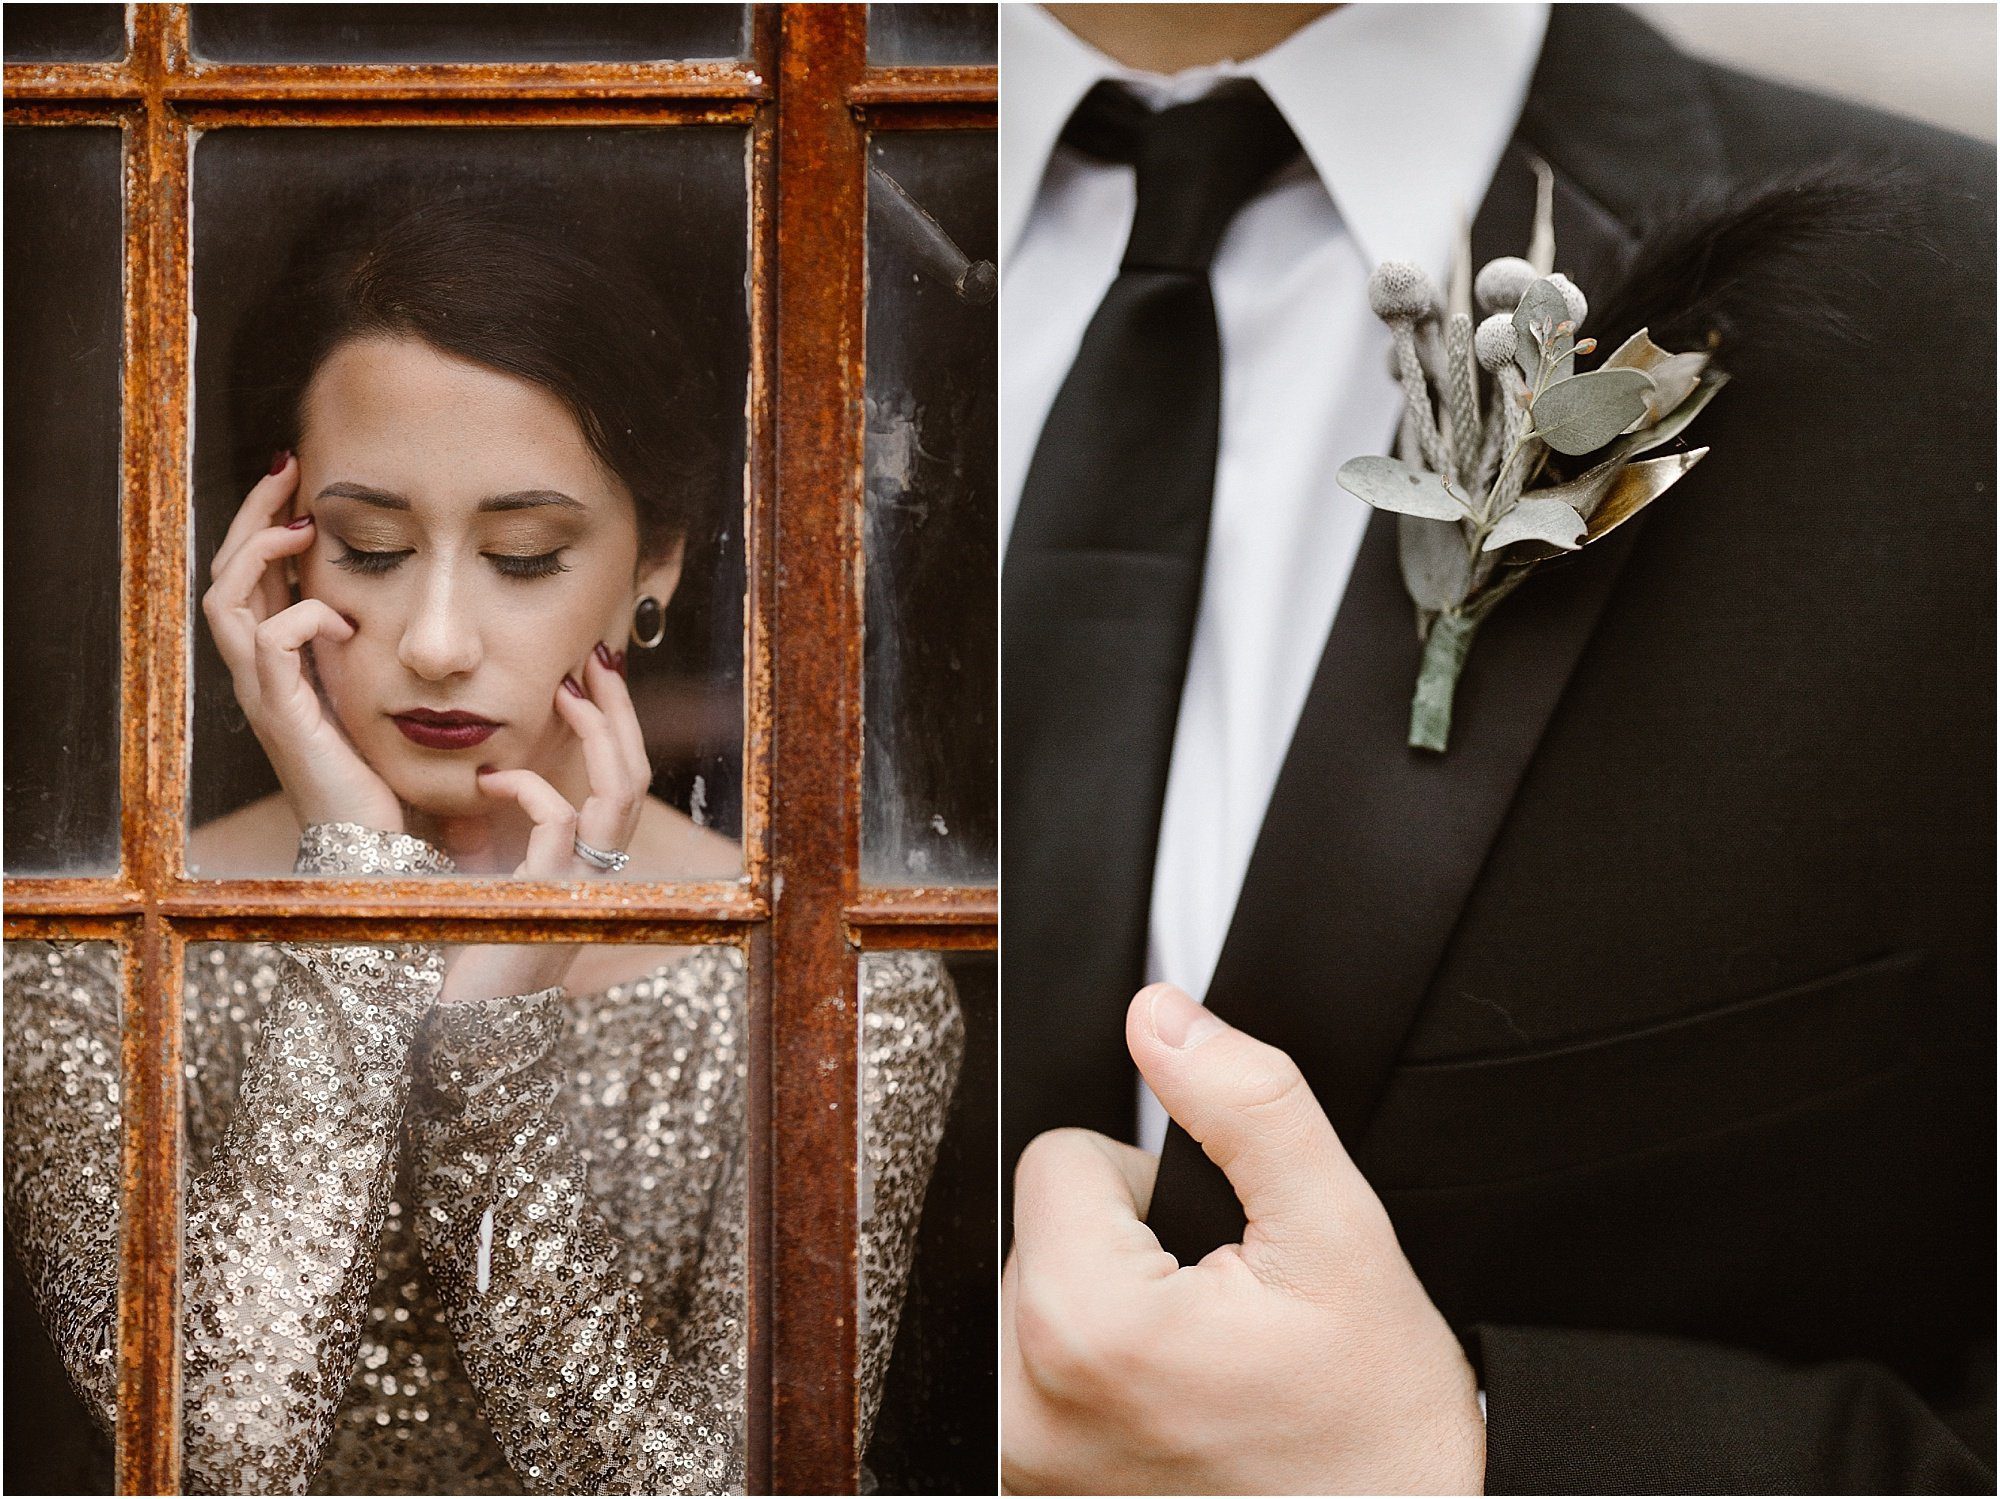 woman stands in front of window wearing gold wedding dress and man holds black jacket with black tie